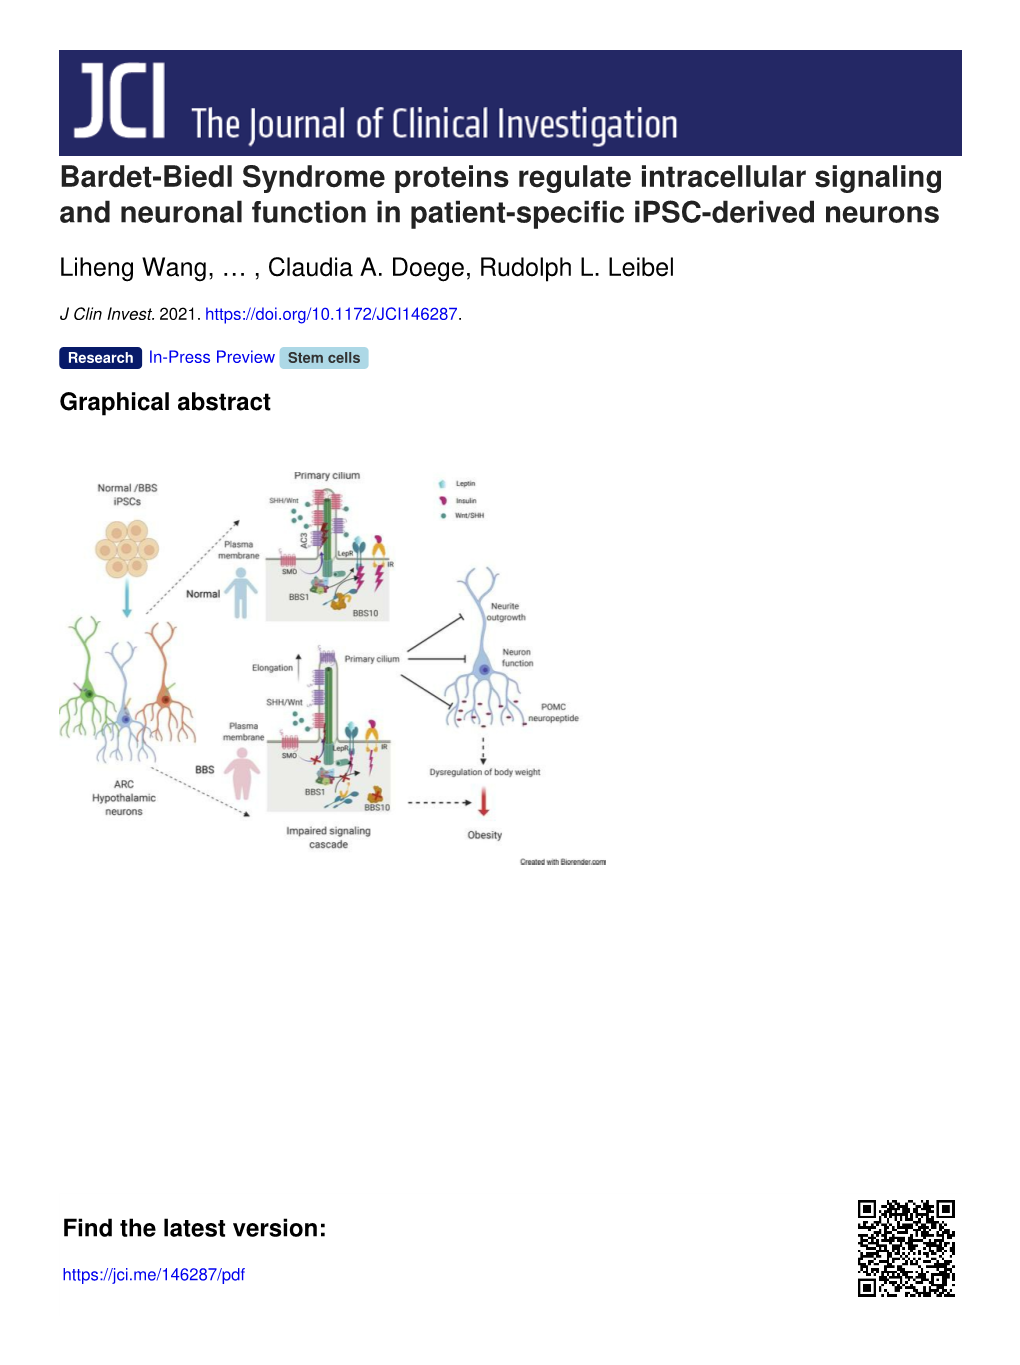 Bardet-Biedl Syndrome Proteins Regulate Intracellular Signaling and Neuronal Function in Patient-Specific Ipsc-Derived Neurons